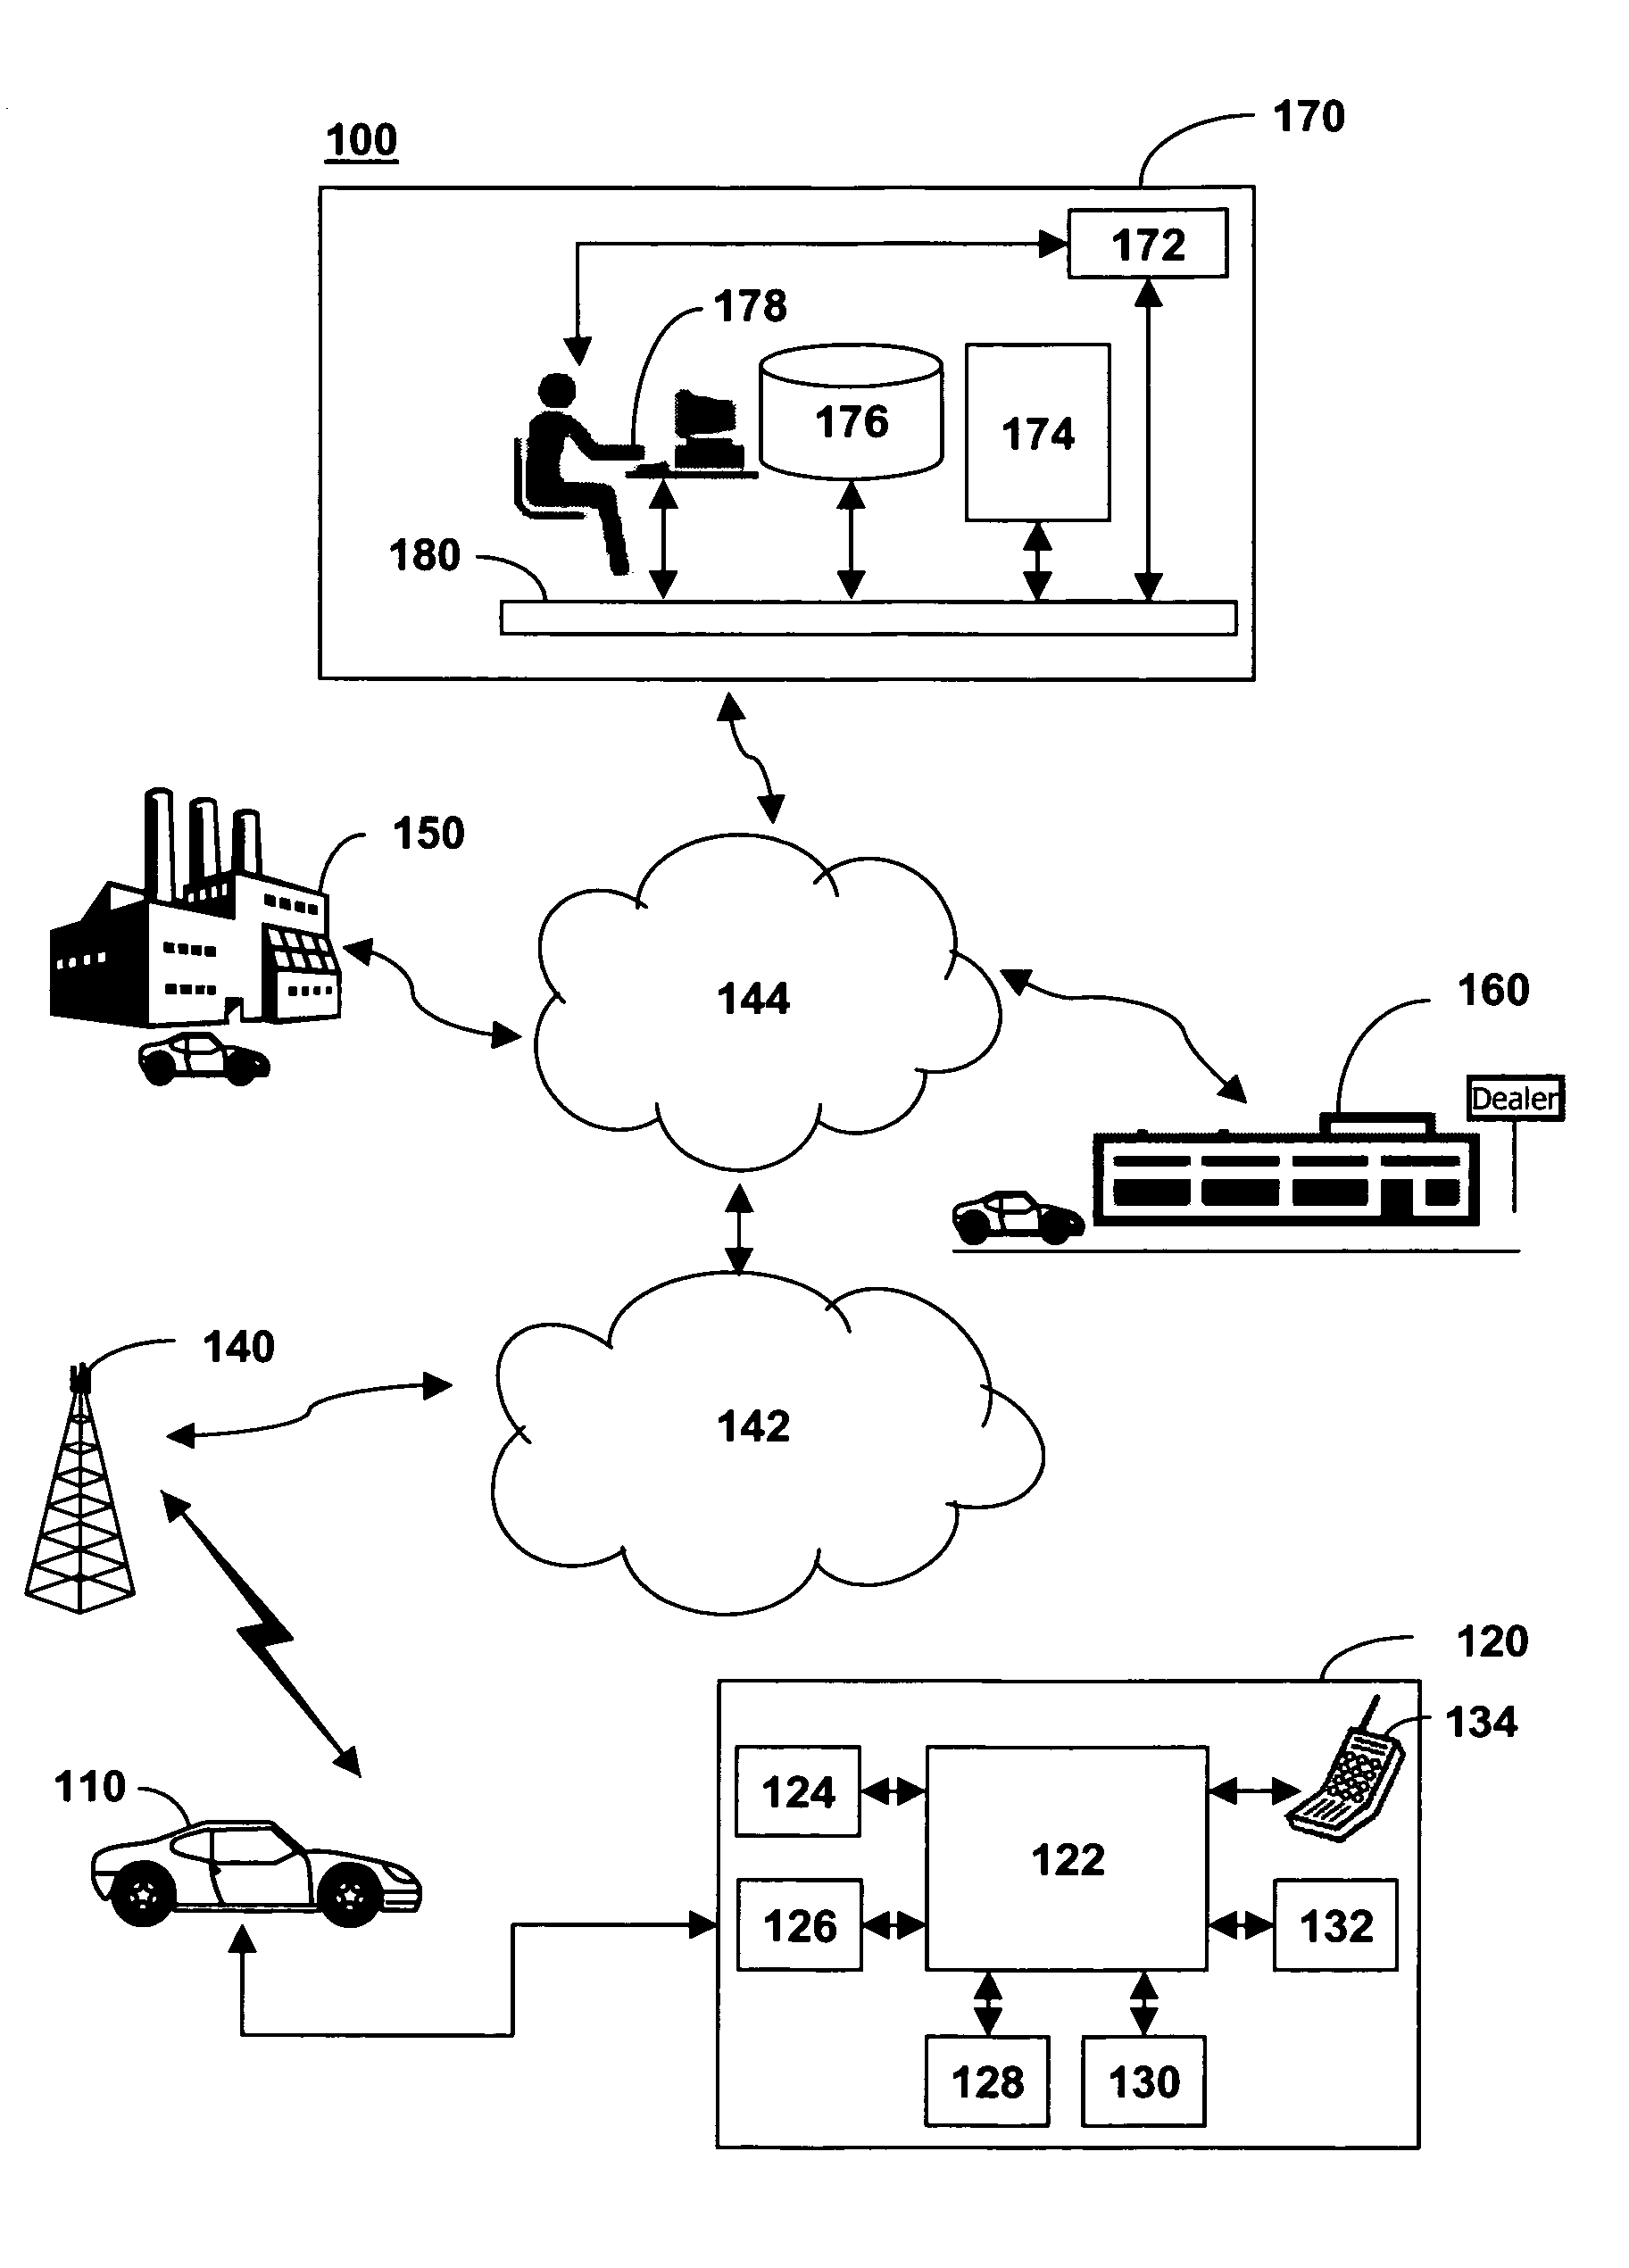 Method of configuring an in-vehicle telematics unit